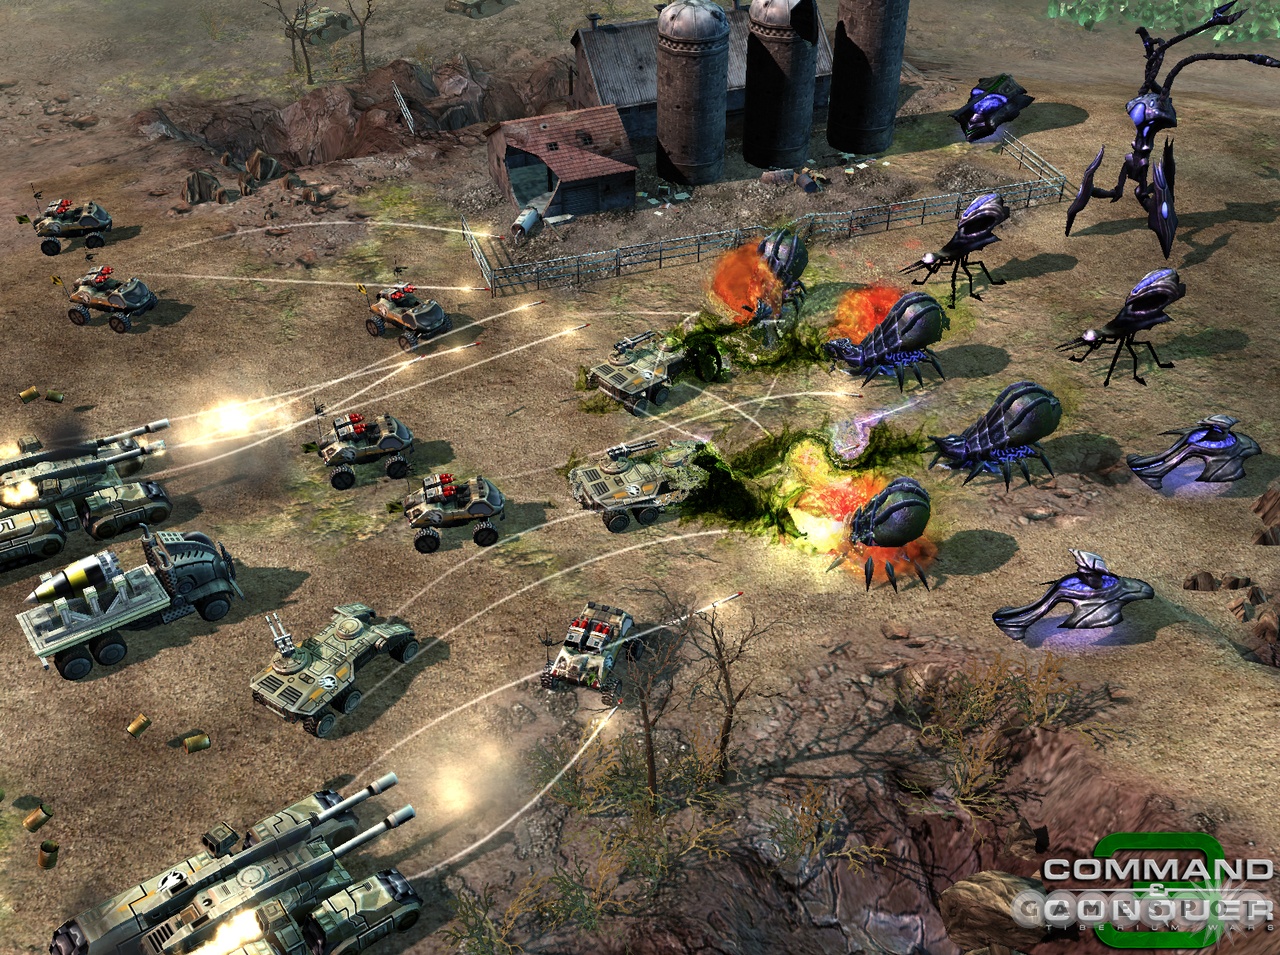 The Wertzone Gratuitous Lists The Command & Conquer Games, Ranked